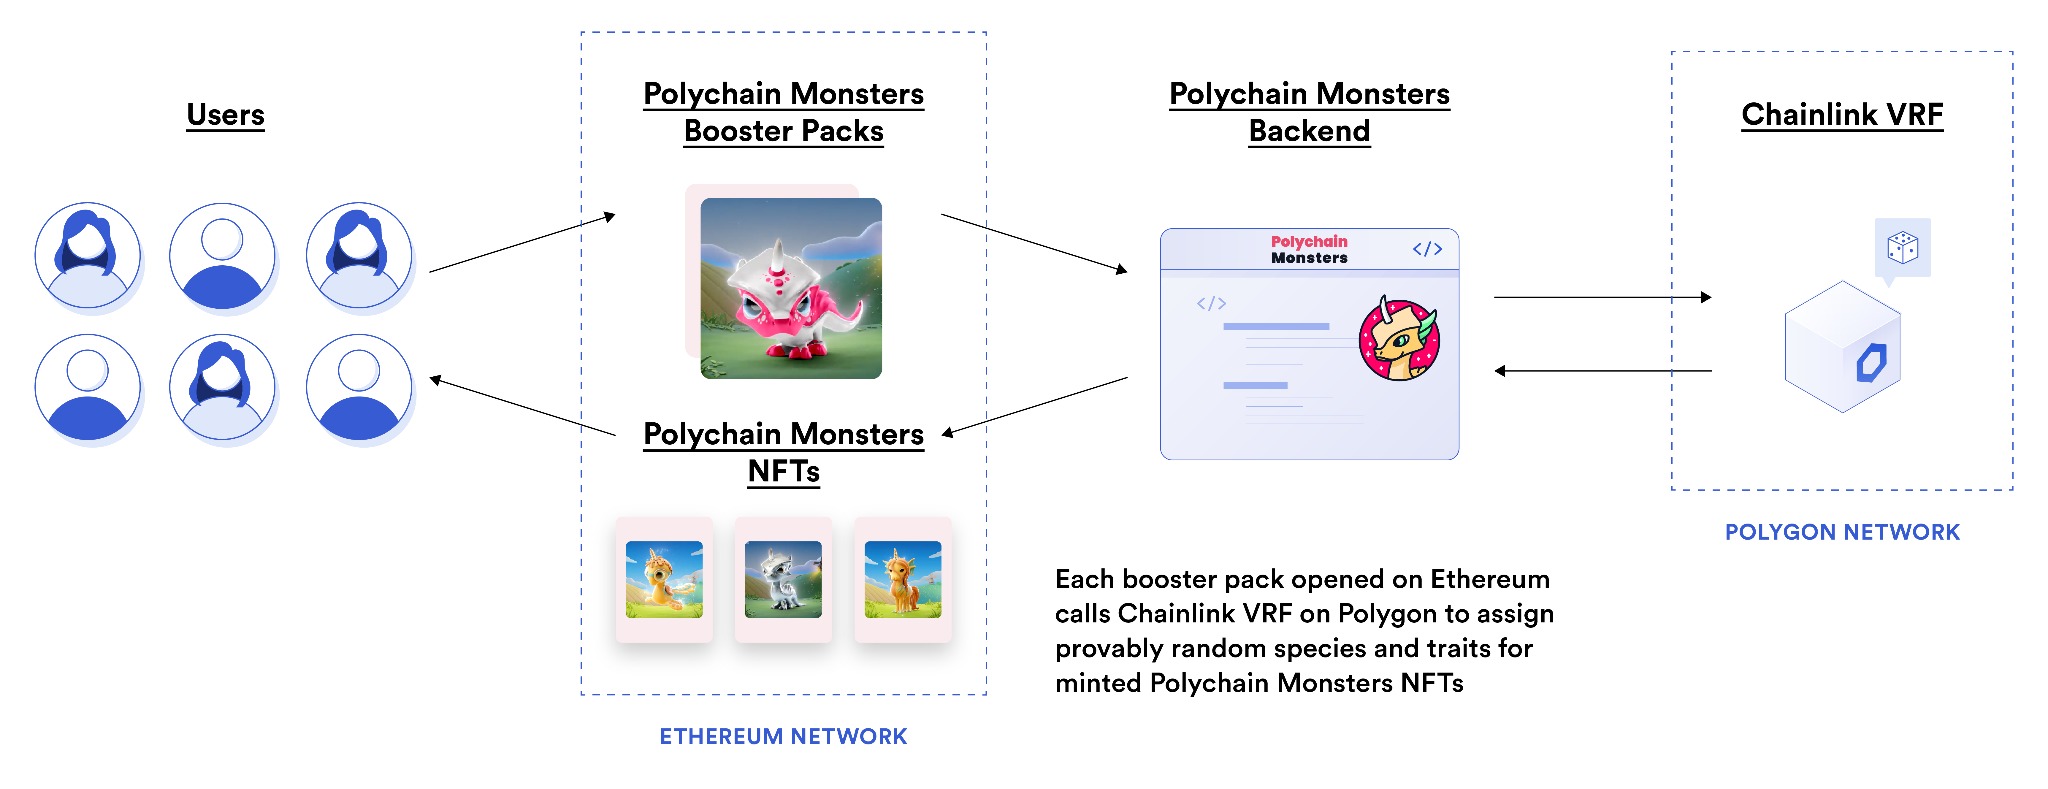 Polychain Monsters use Chainlink VRF to assign traits to its NFTs.